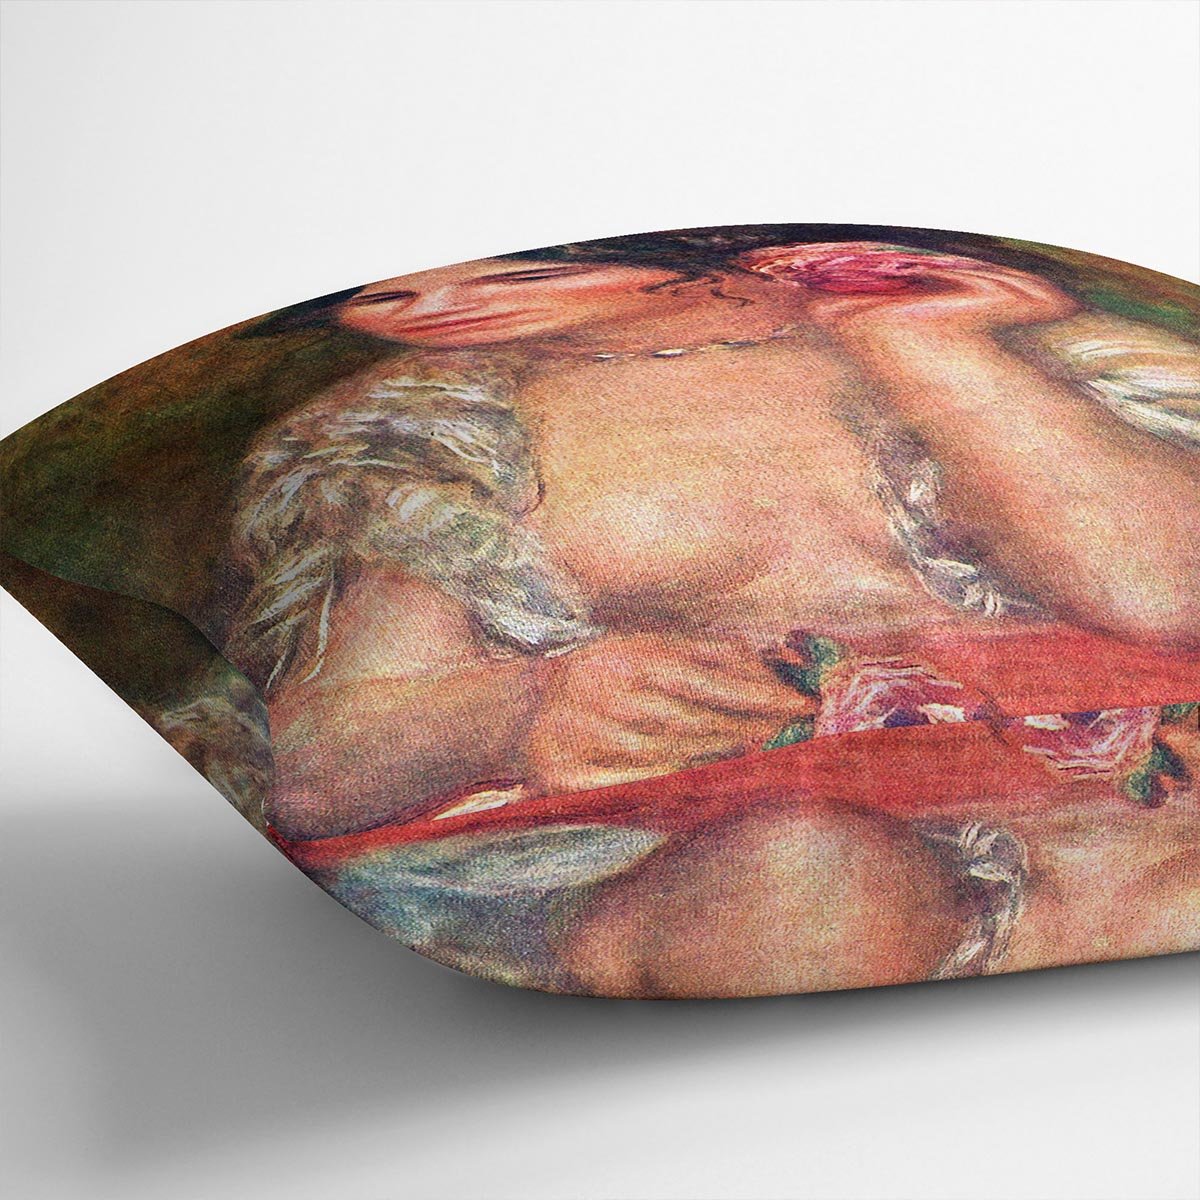 Gabriele with a rose by Renoir Throw Pillow